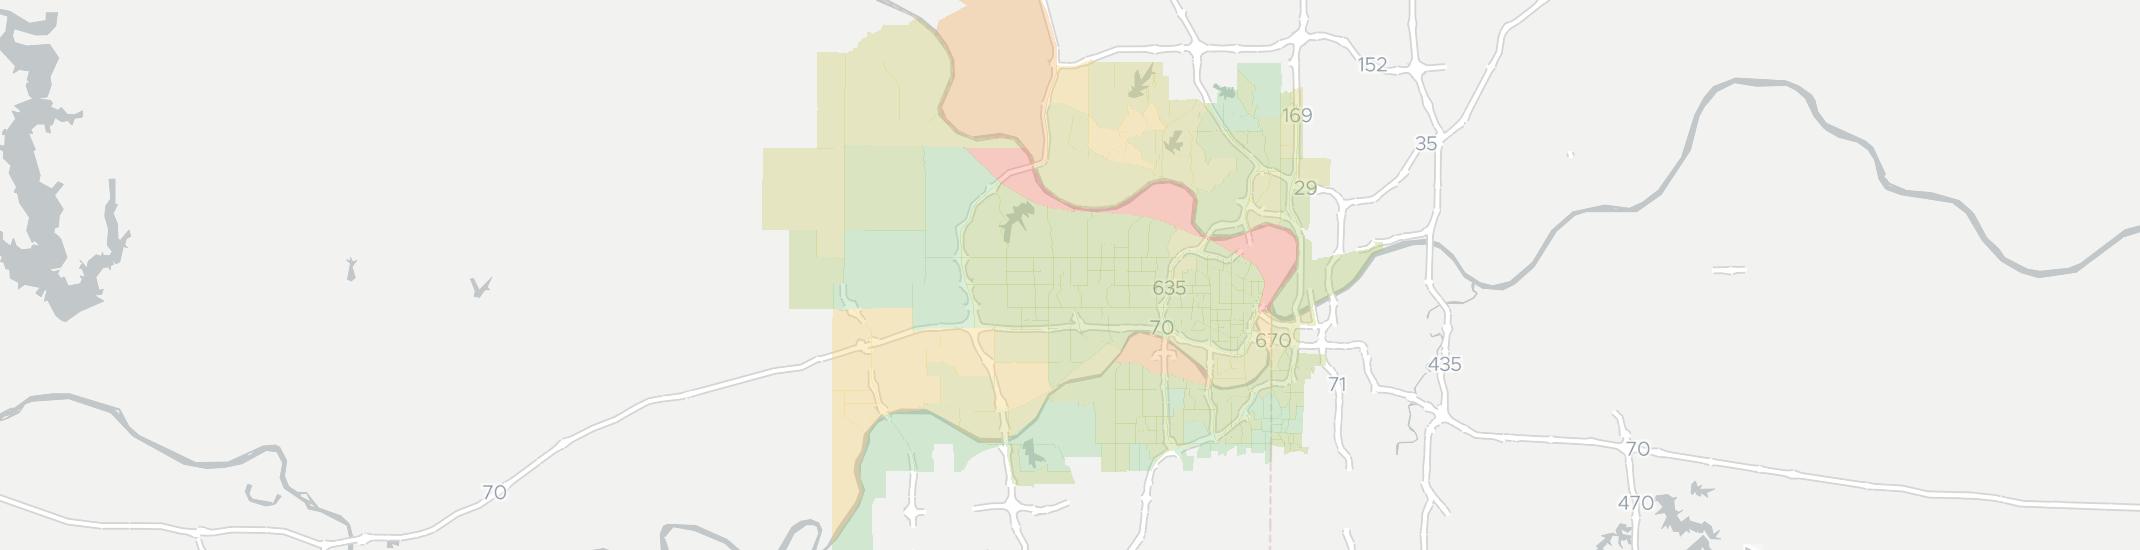 Kansas City Internet Competition Map. Click for interactive map.